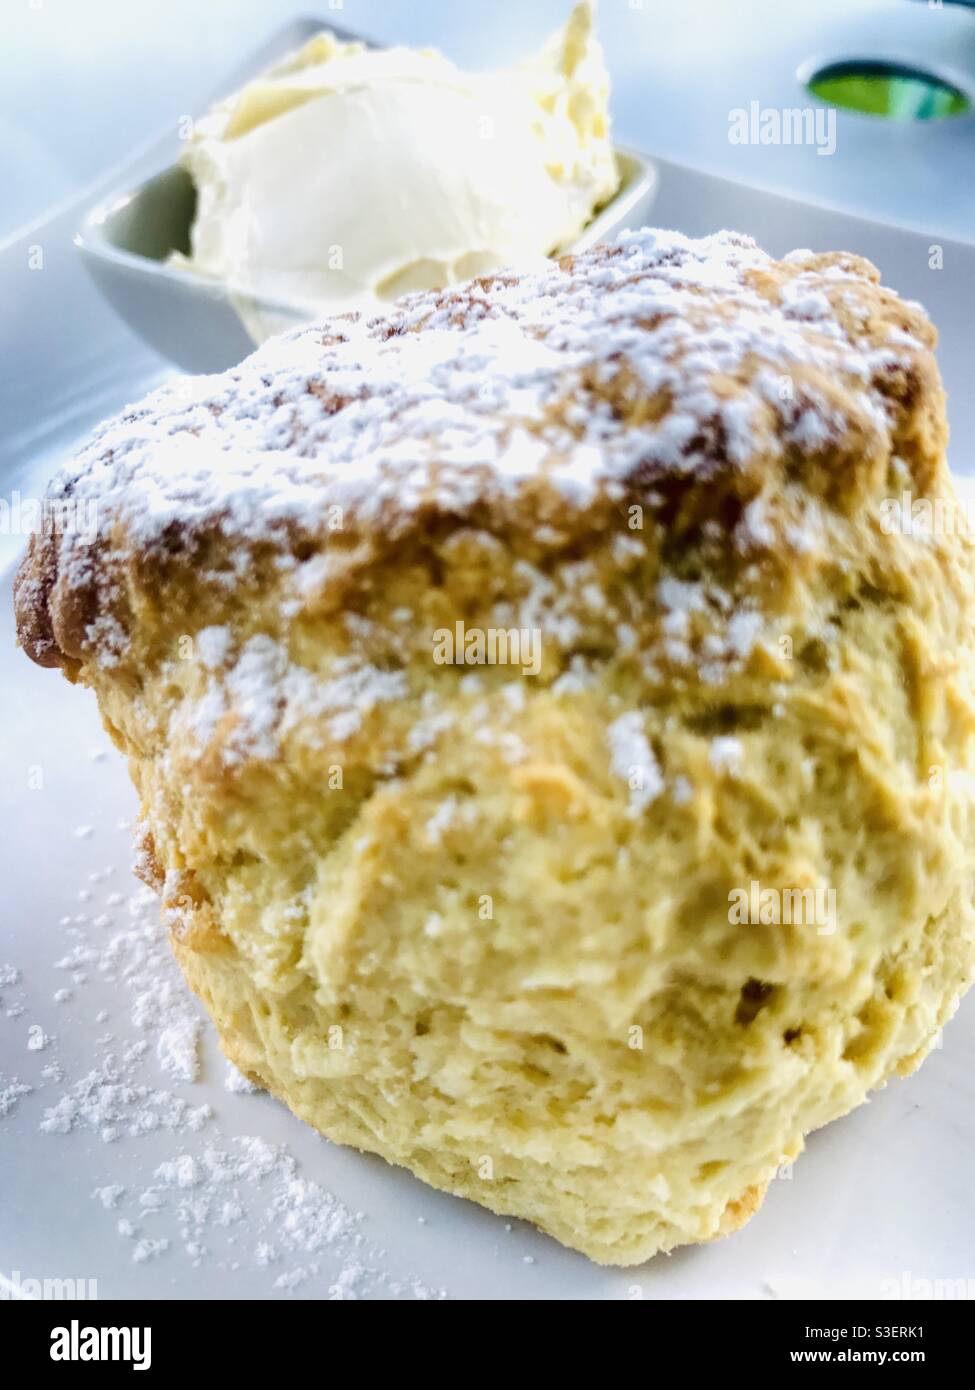 Closeup view of a freshly baked scone with Cornish clotted cream in the background Stock Photo